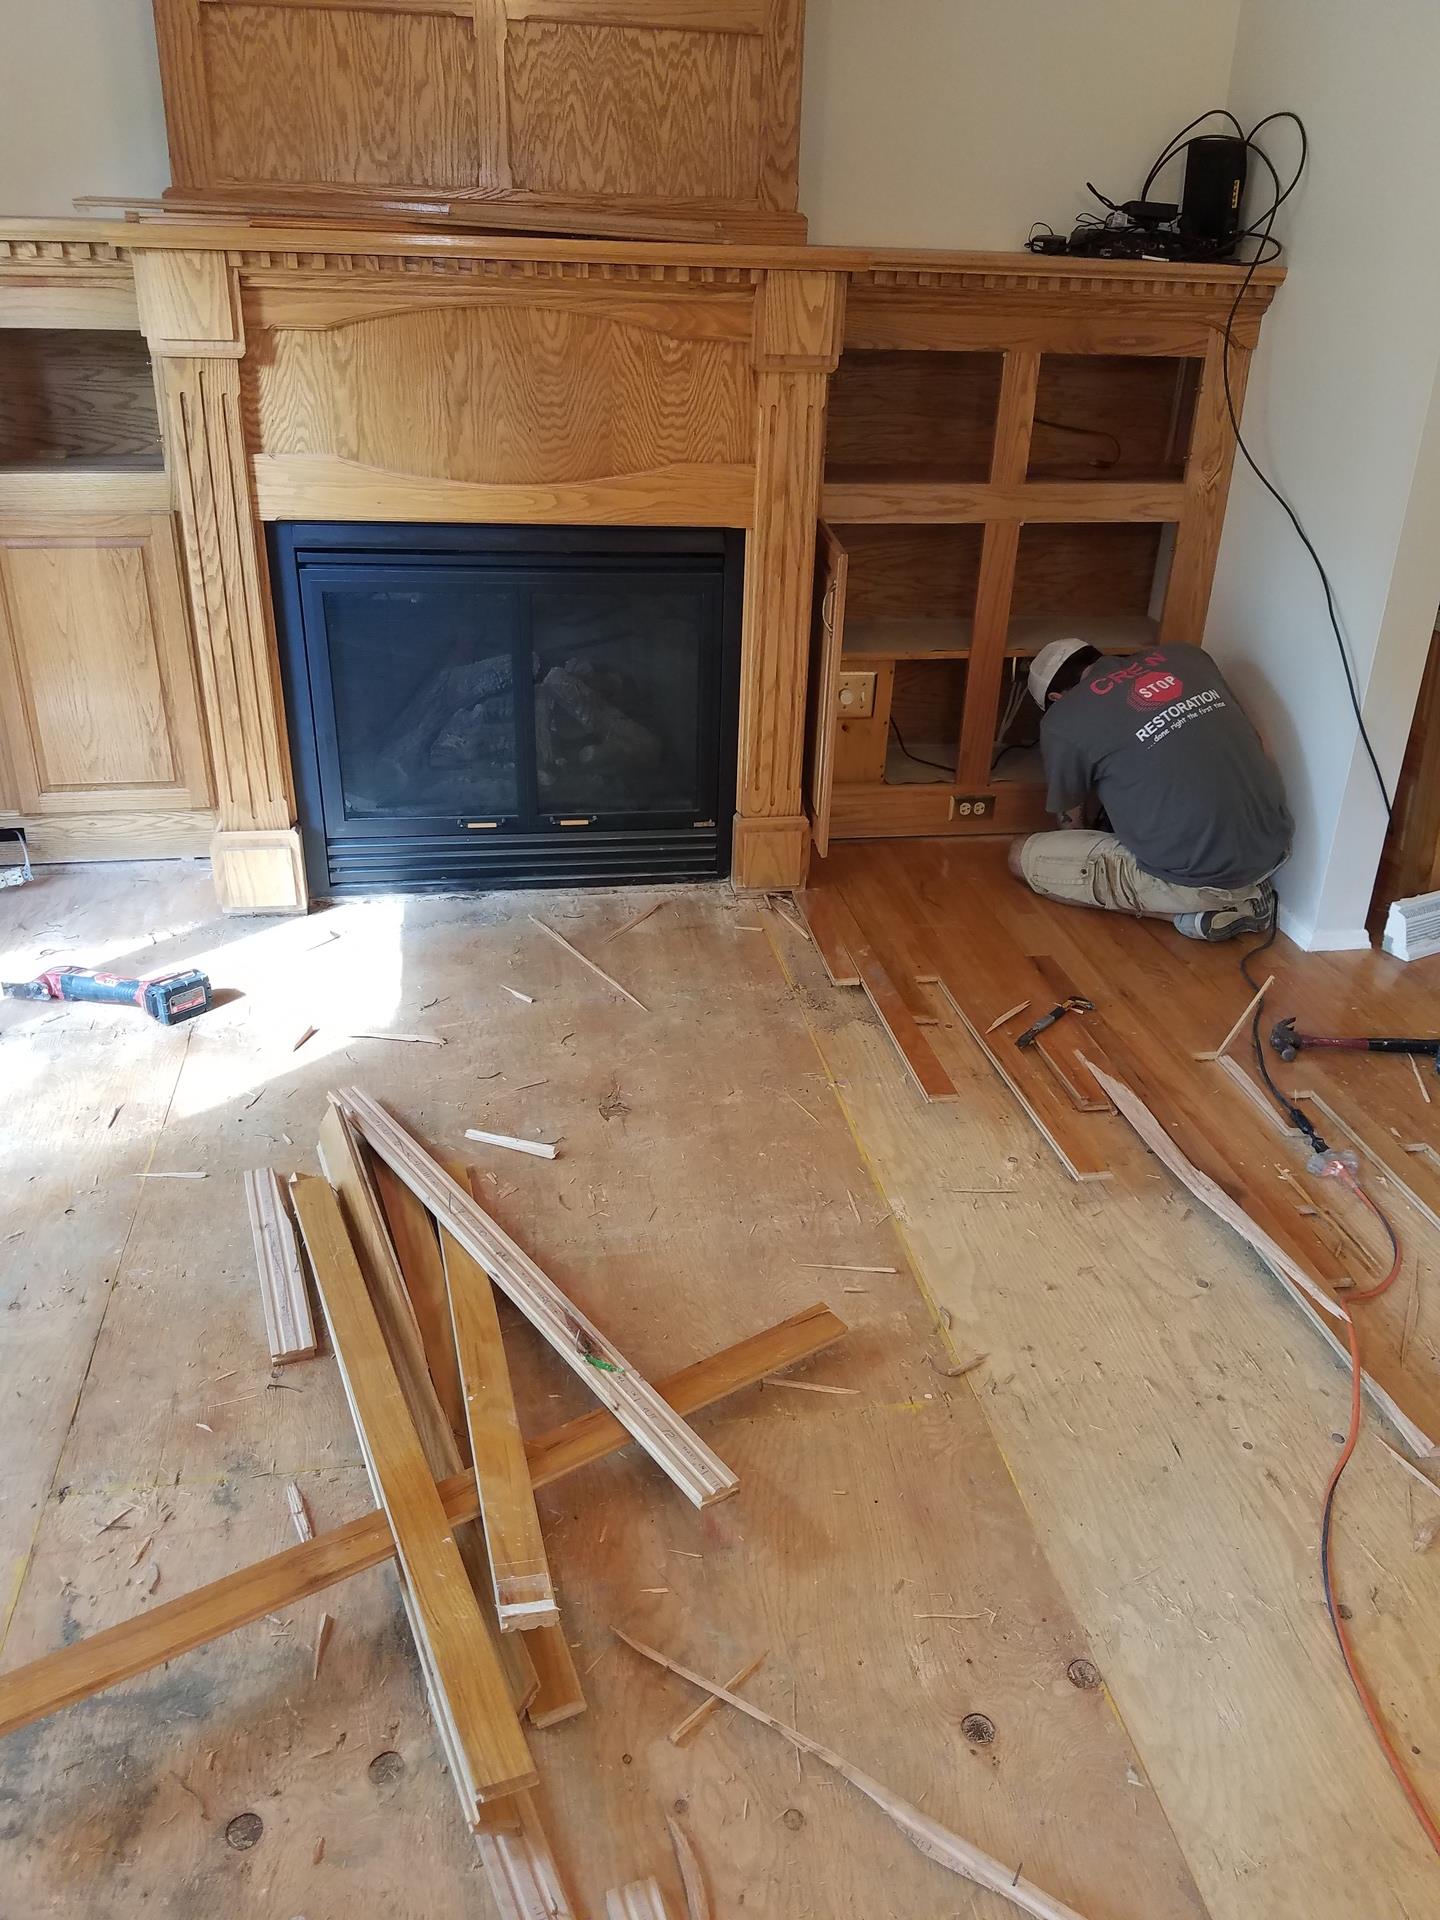 Floor boards being stripped